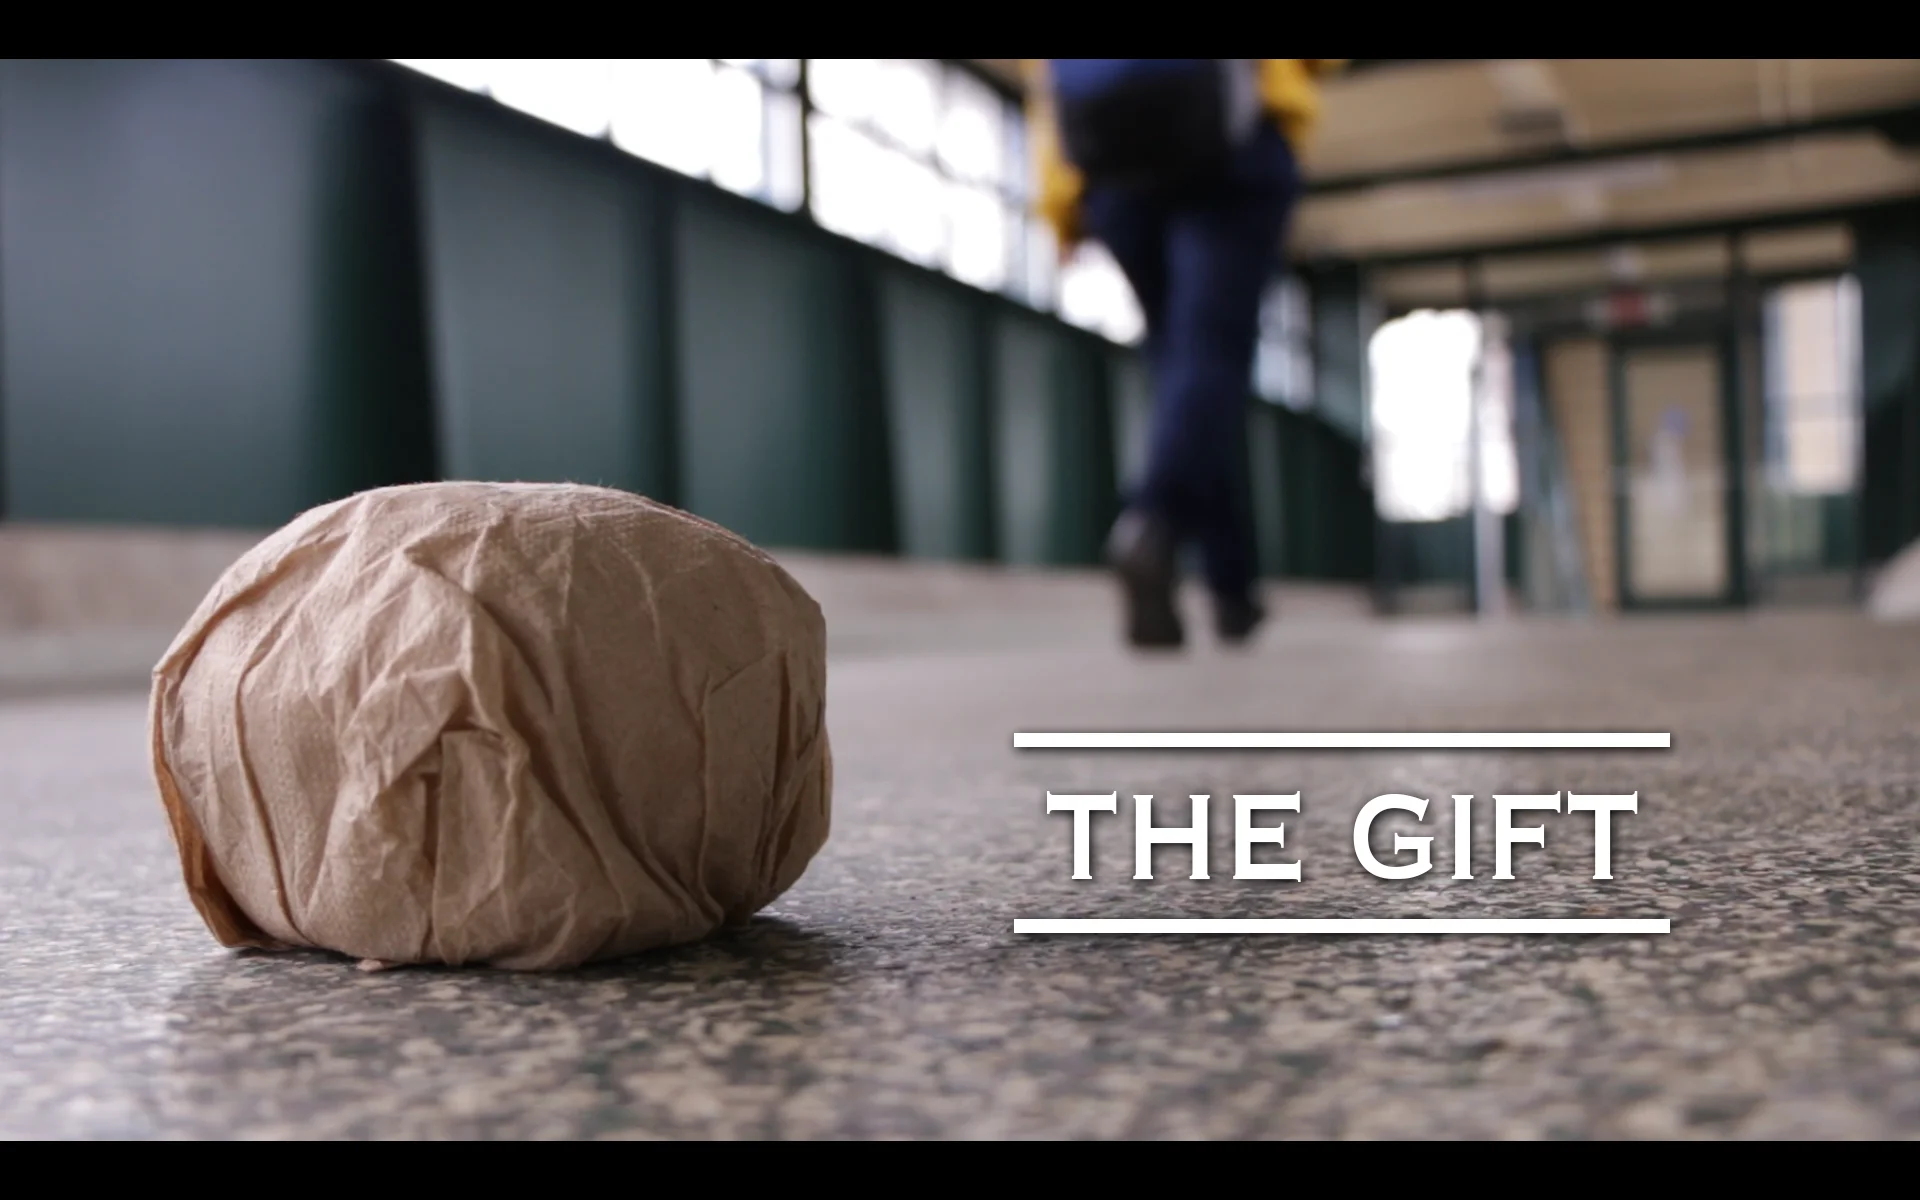 THE GIFT (2017) - Student Film  